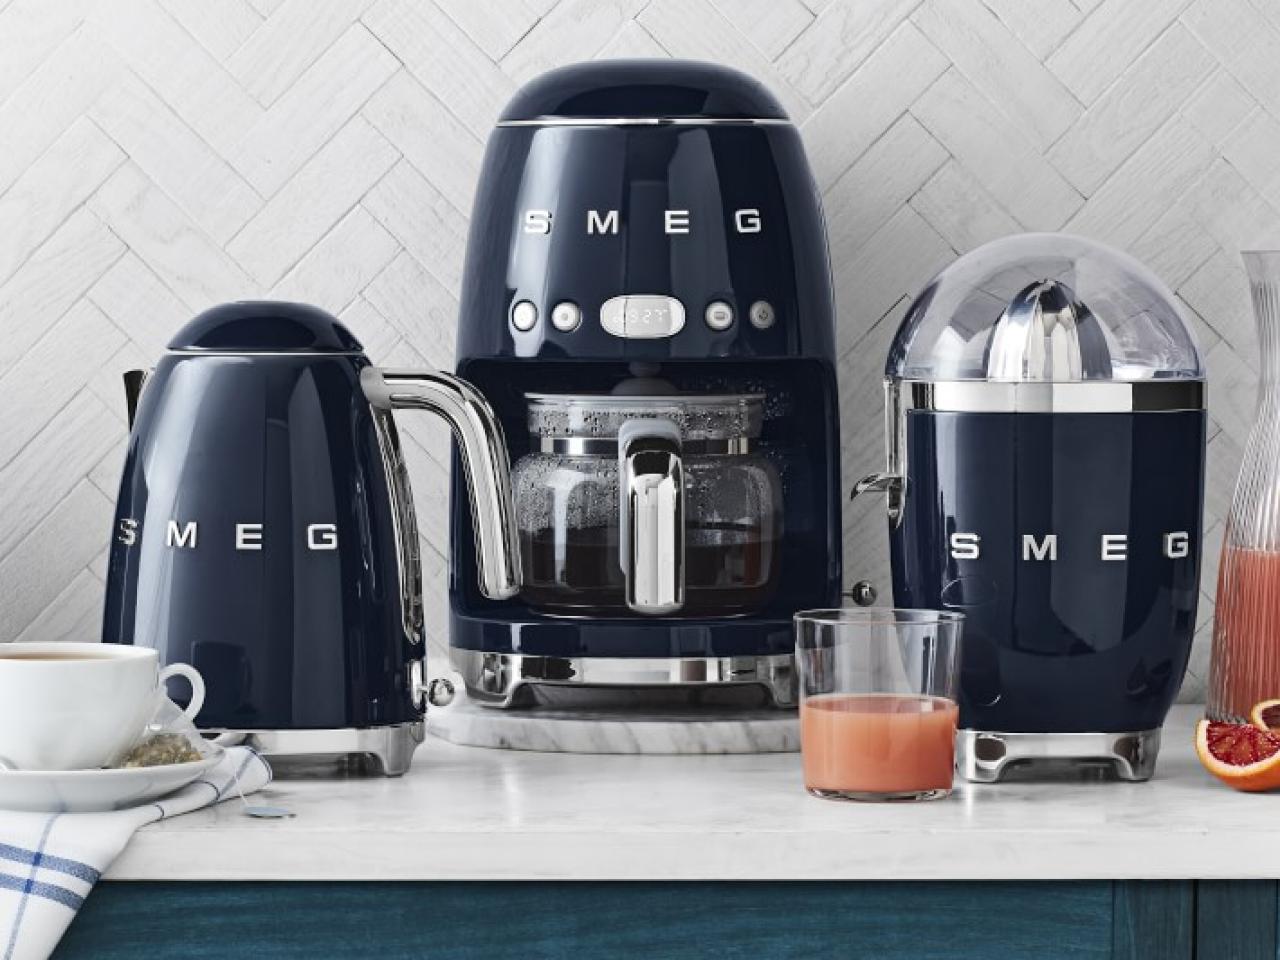 Smeg's New Navy Color Launch, FN Dish - Behind-the-Scenes, Food Trends,  and Best Recipes : Food Network